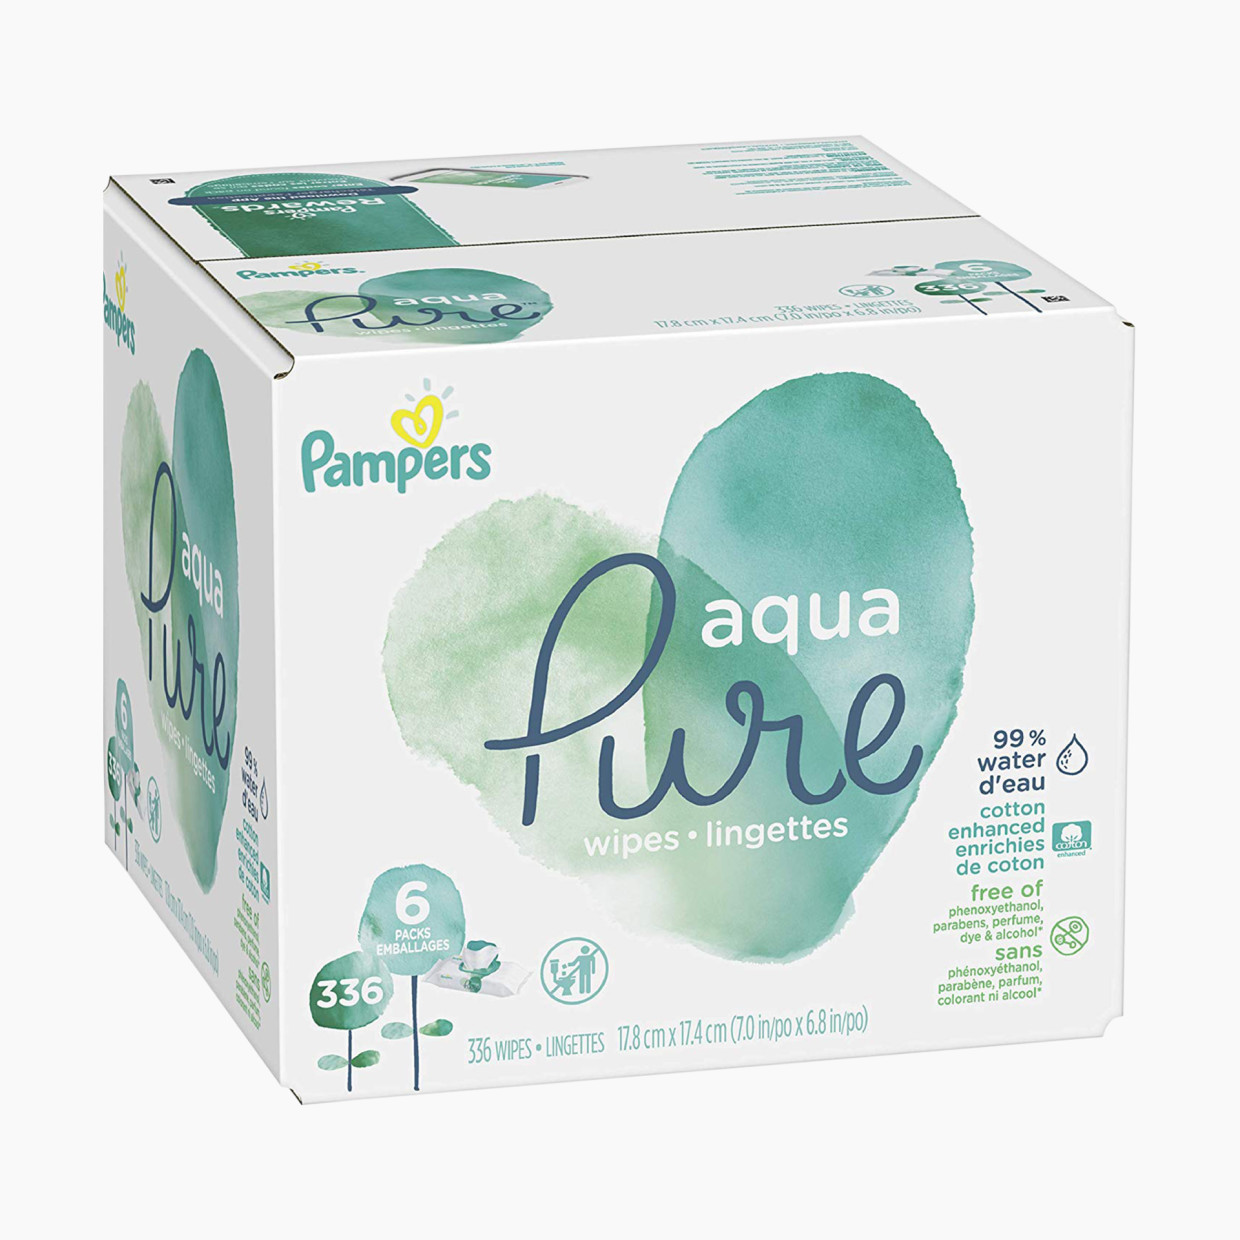 Pampers Aquapure Baby Wipes - 336.